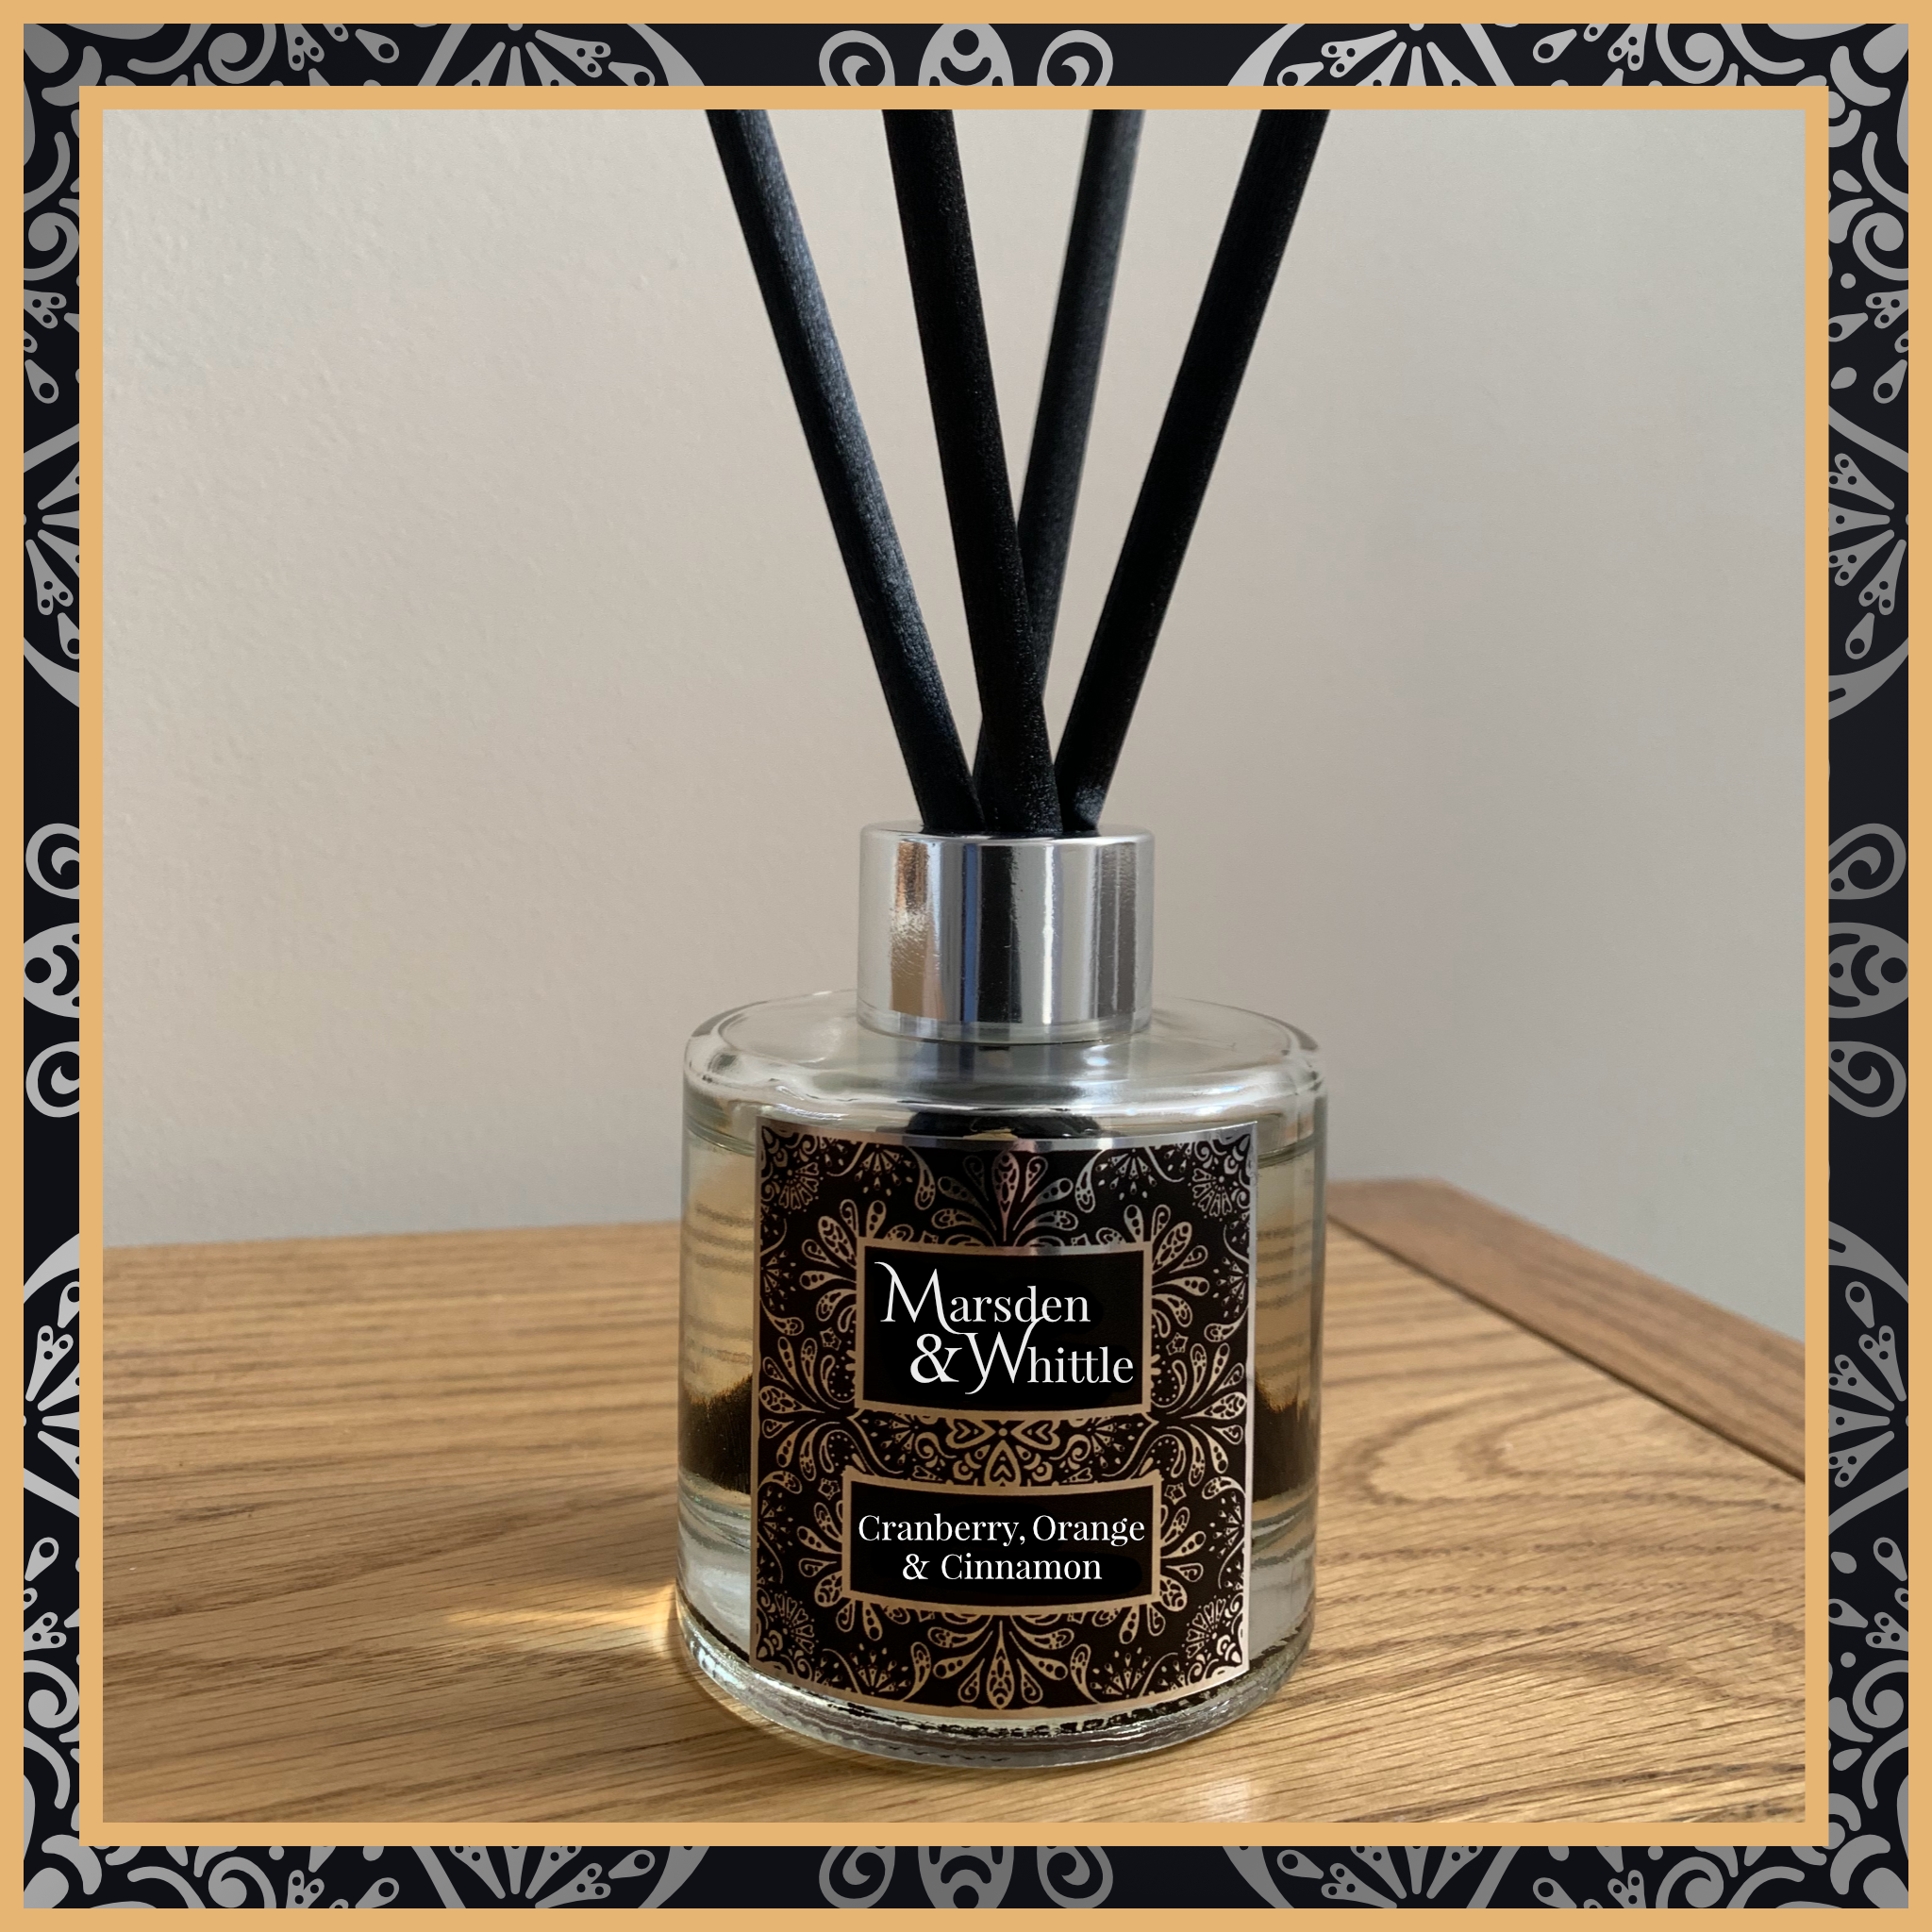 A Cranberry, Orange and Cinnamon glass reed diffuser with black reeds and a silver chrome cap sitting on a wooden table.